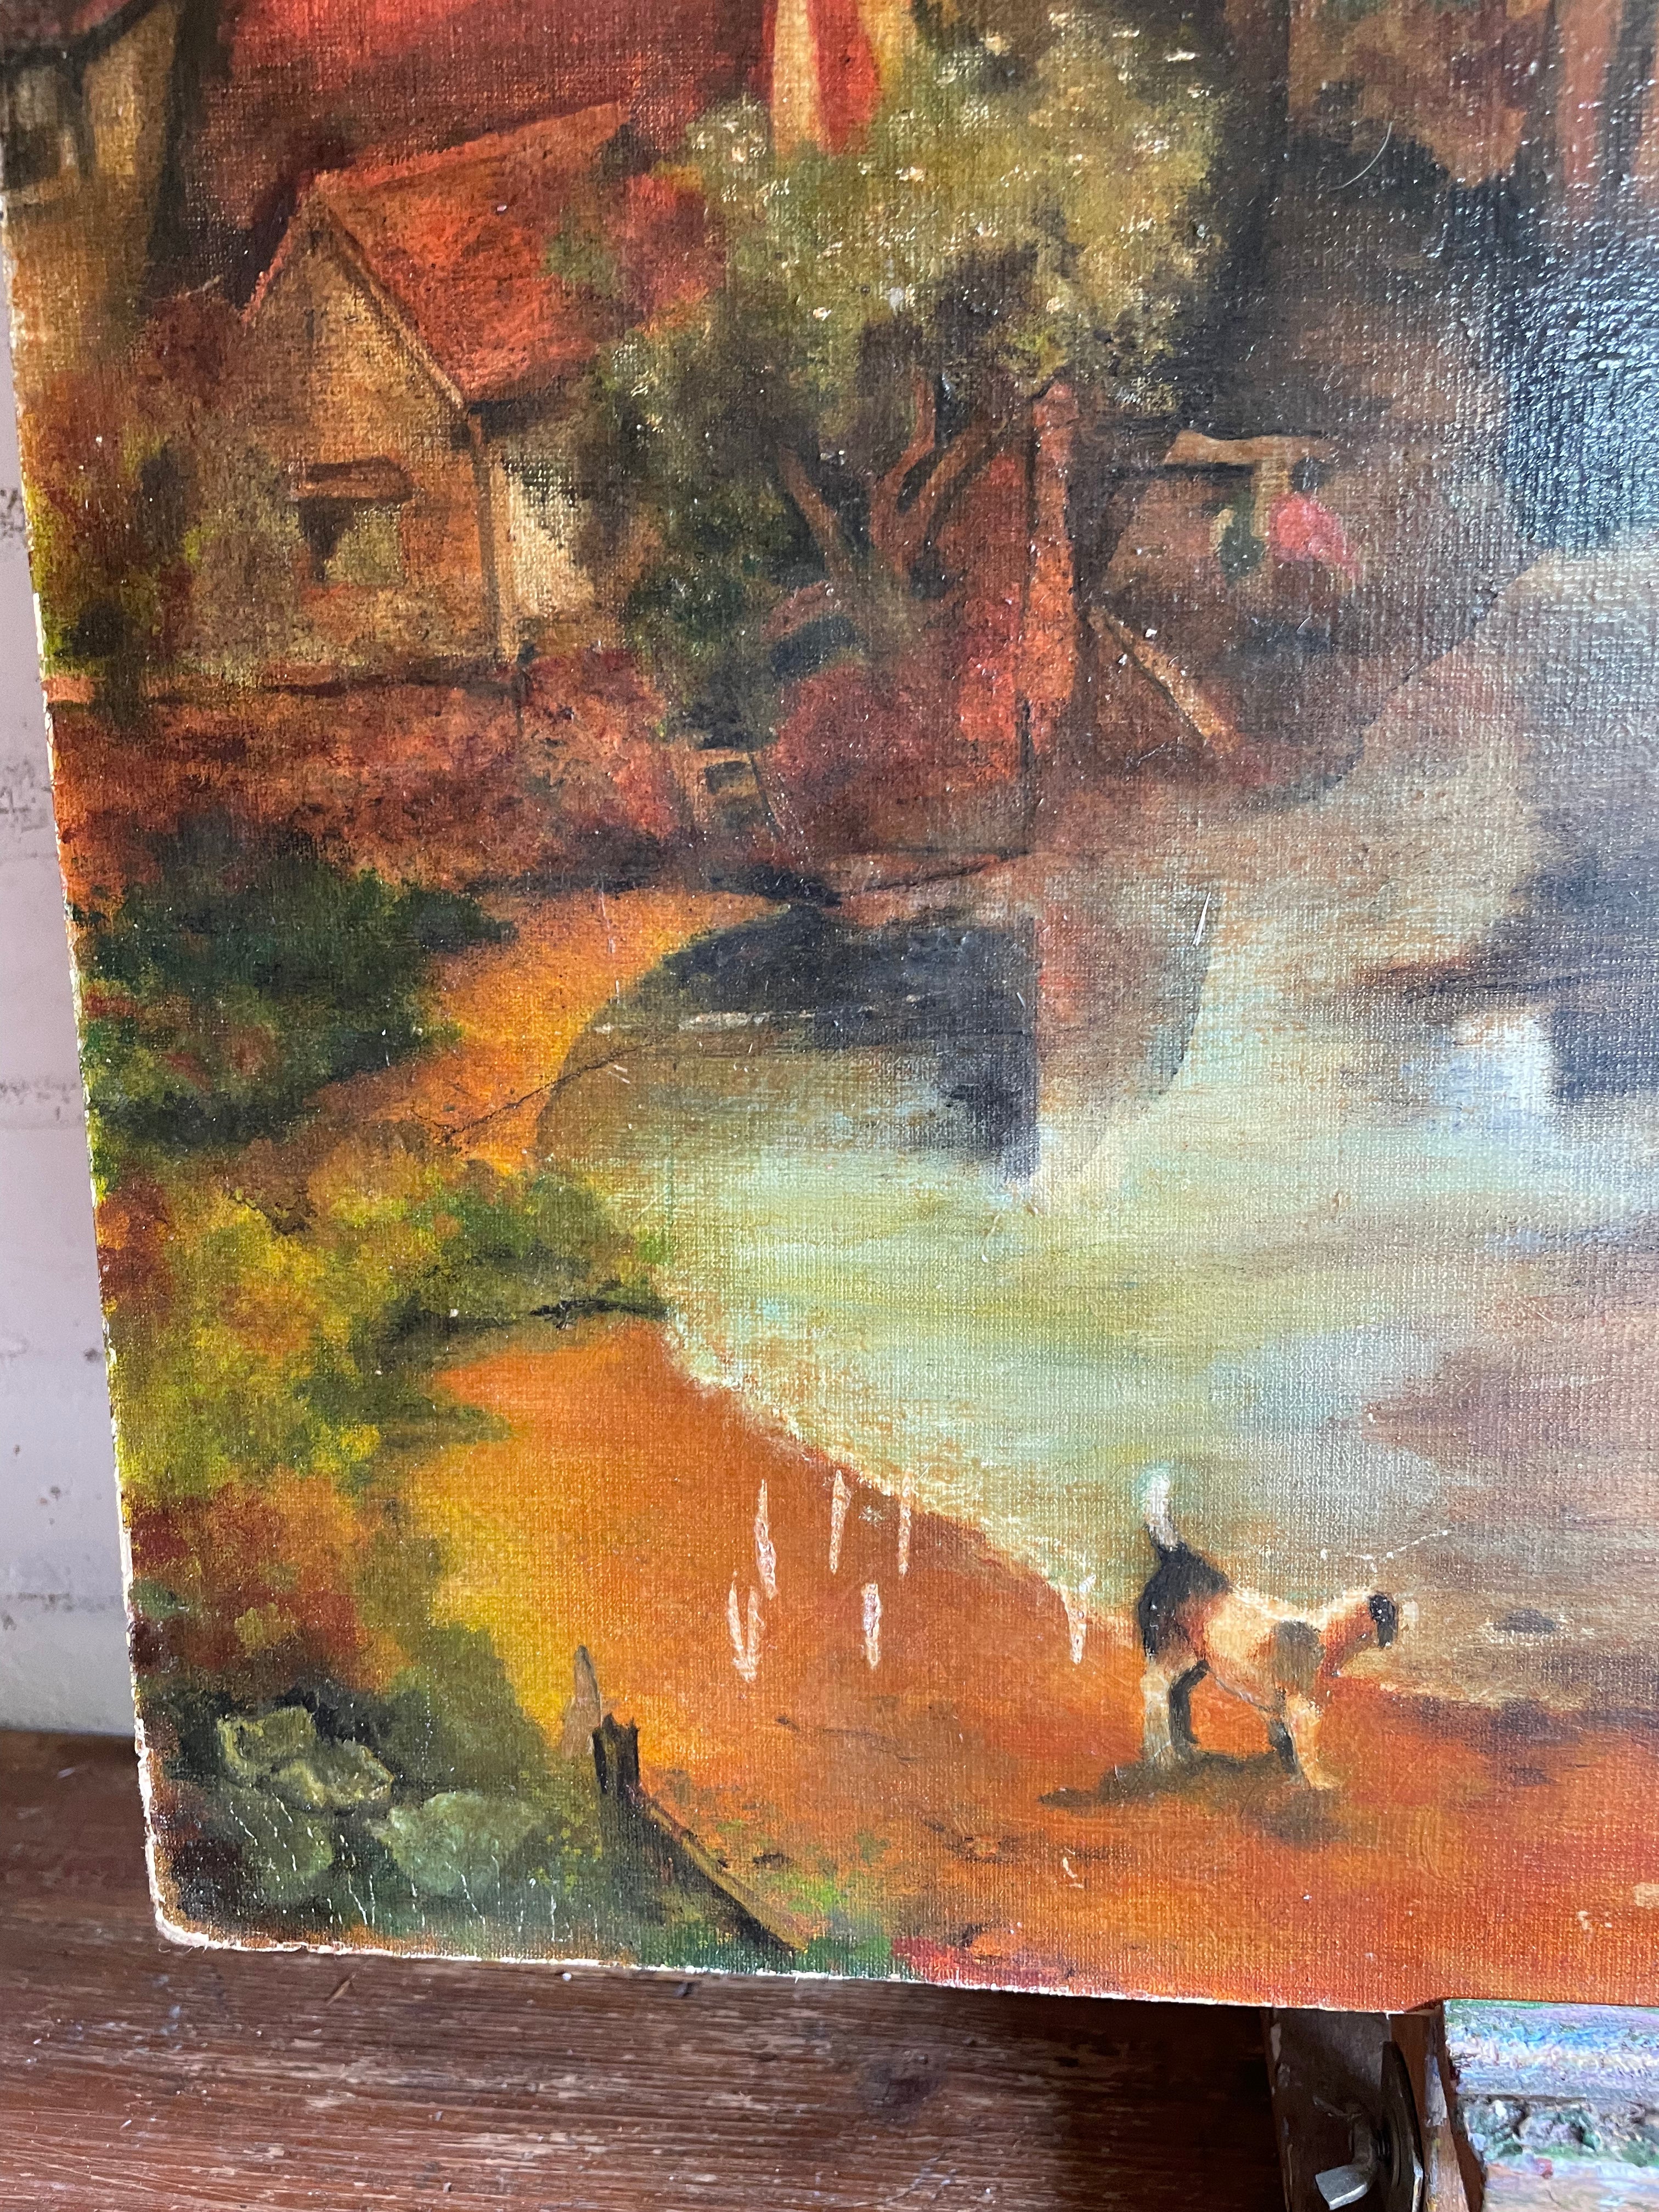 Crossing the River: Large Oil on Board